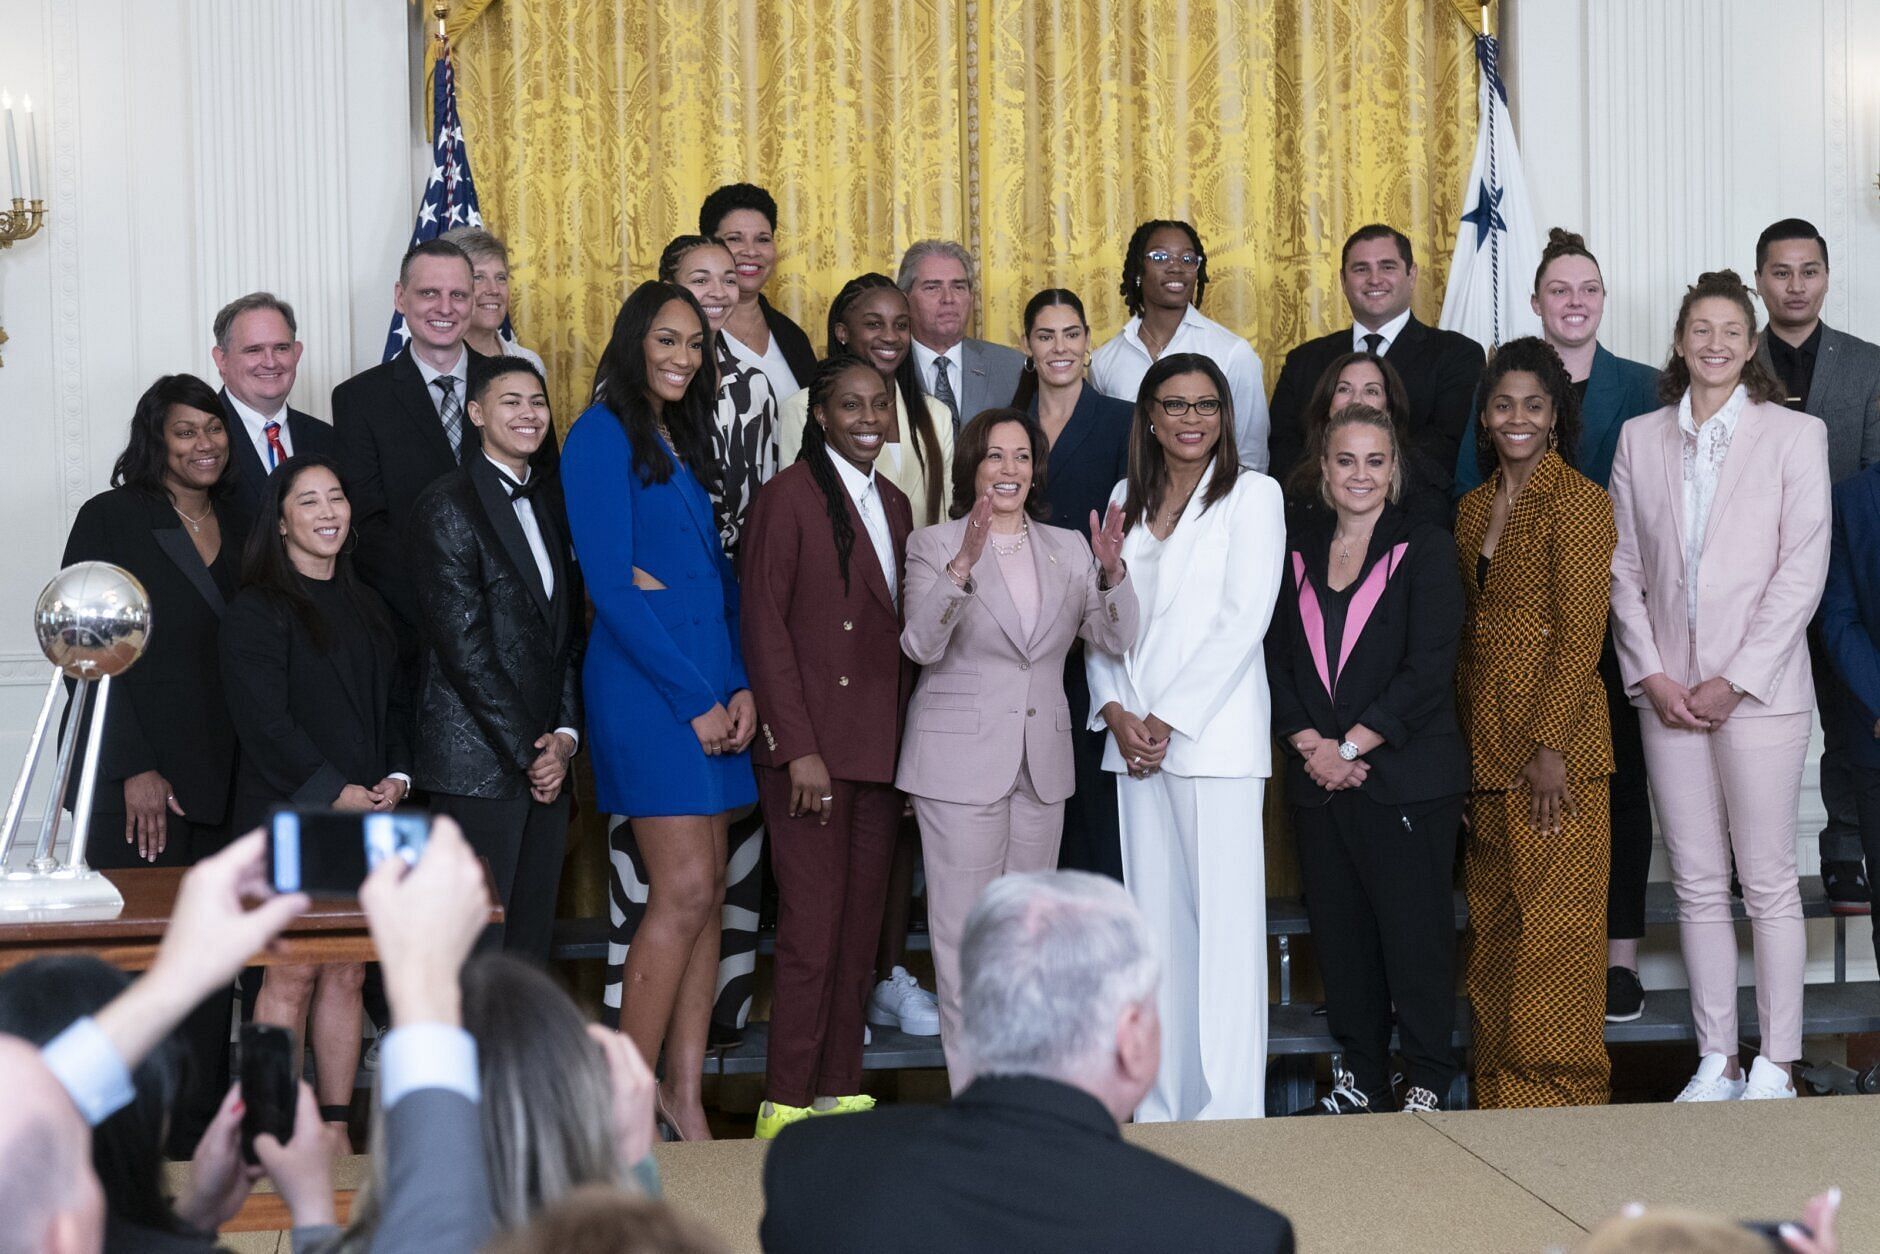 Vice President of the United States Kamala Harris welcomed 2022 WNBA champions Las Vegas Aces and coach Becky Hammon to the White House